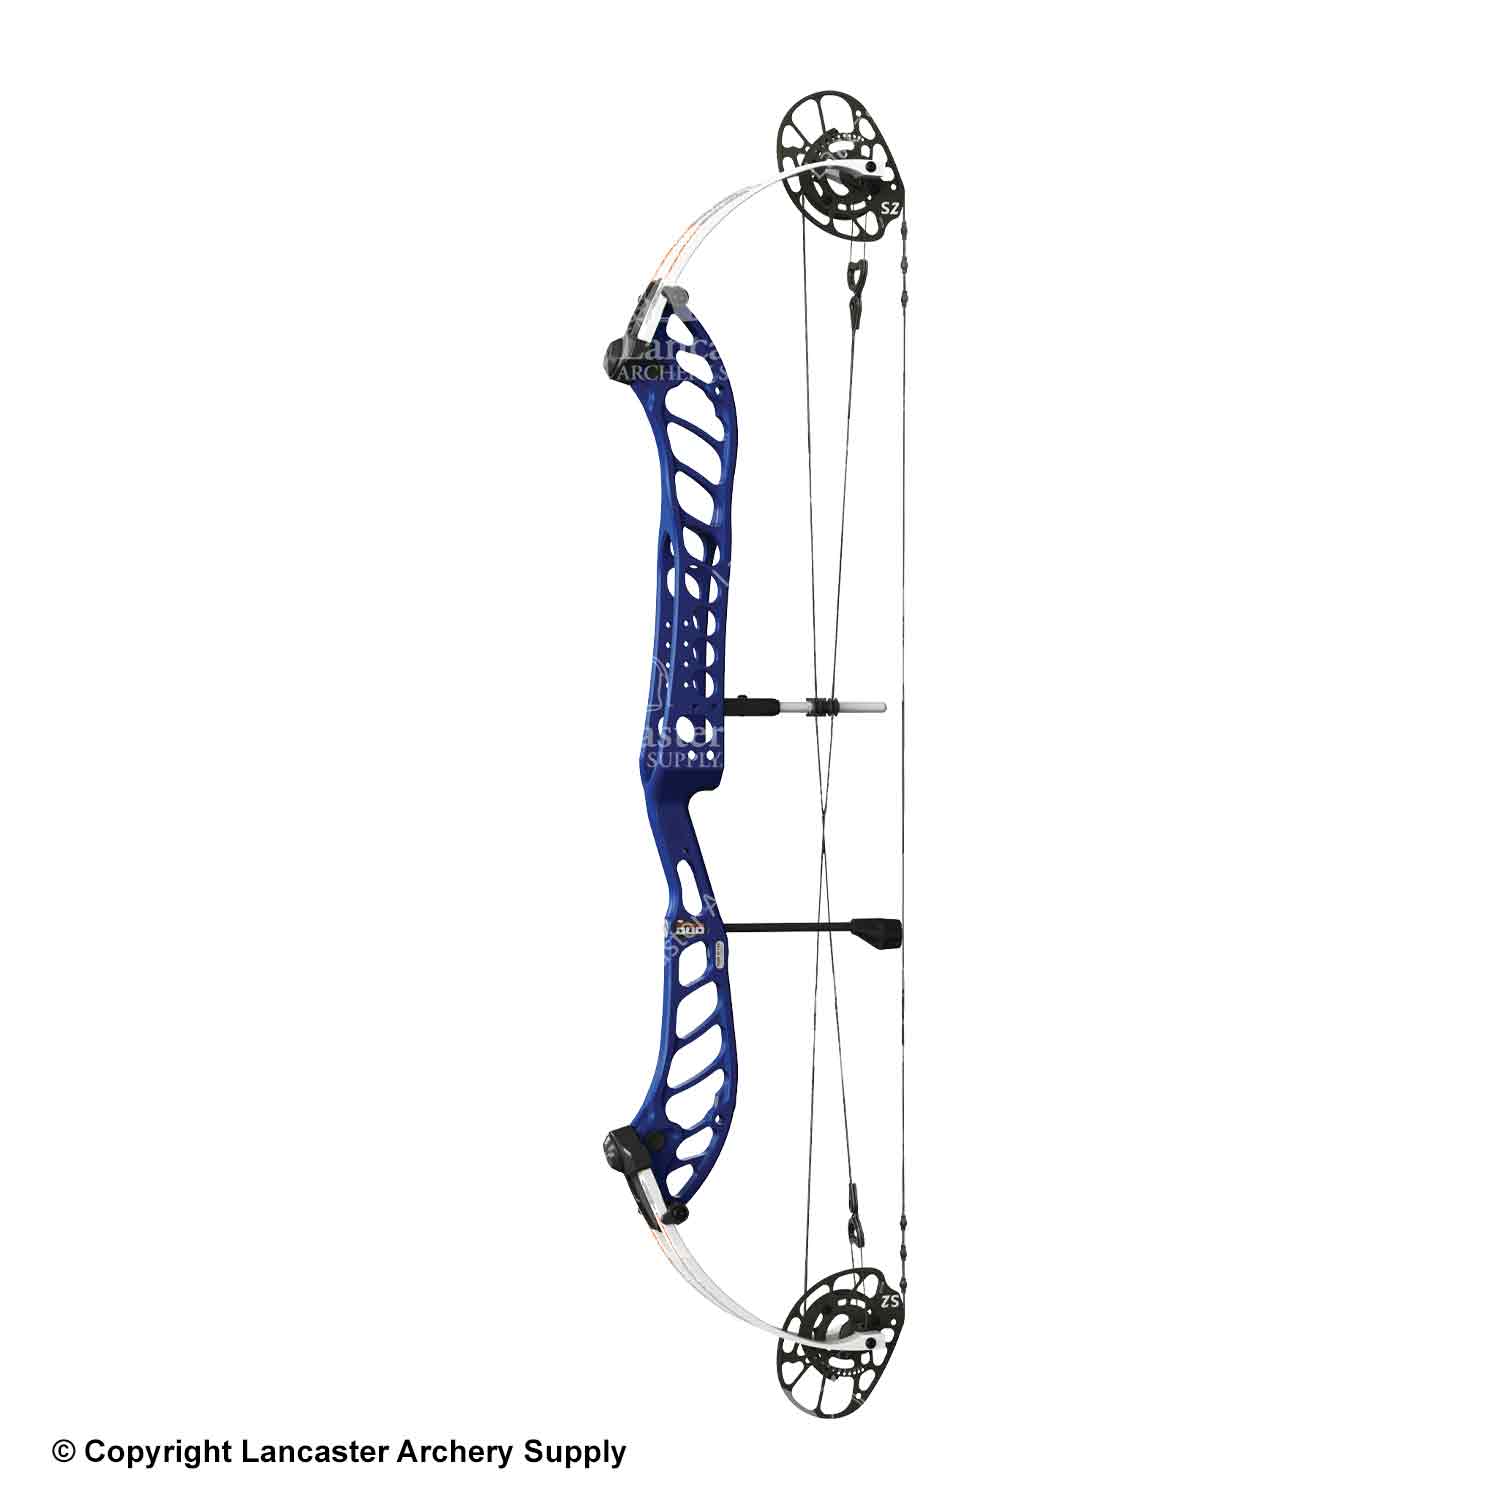 PSE Dominator Duo 38 Compound Target Bow (S2)